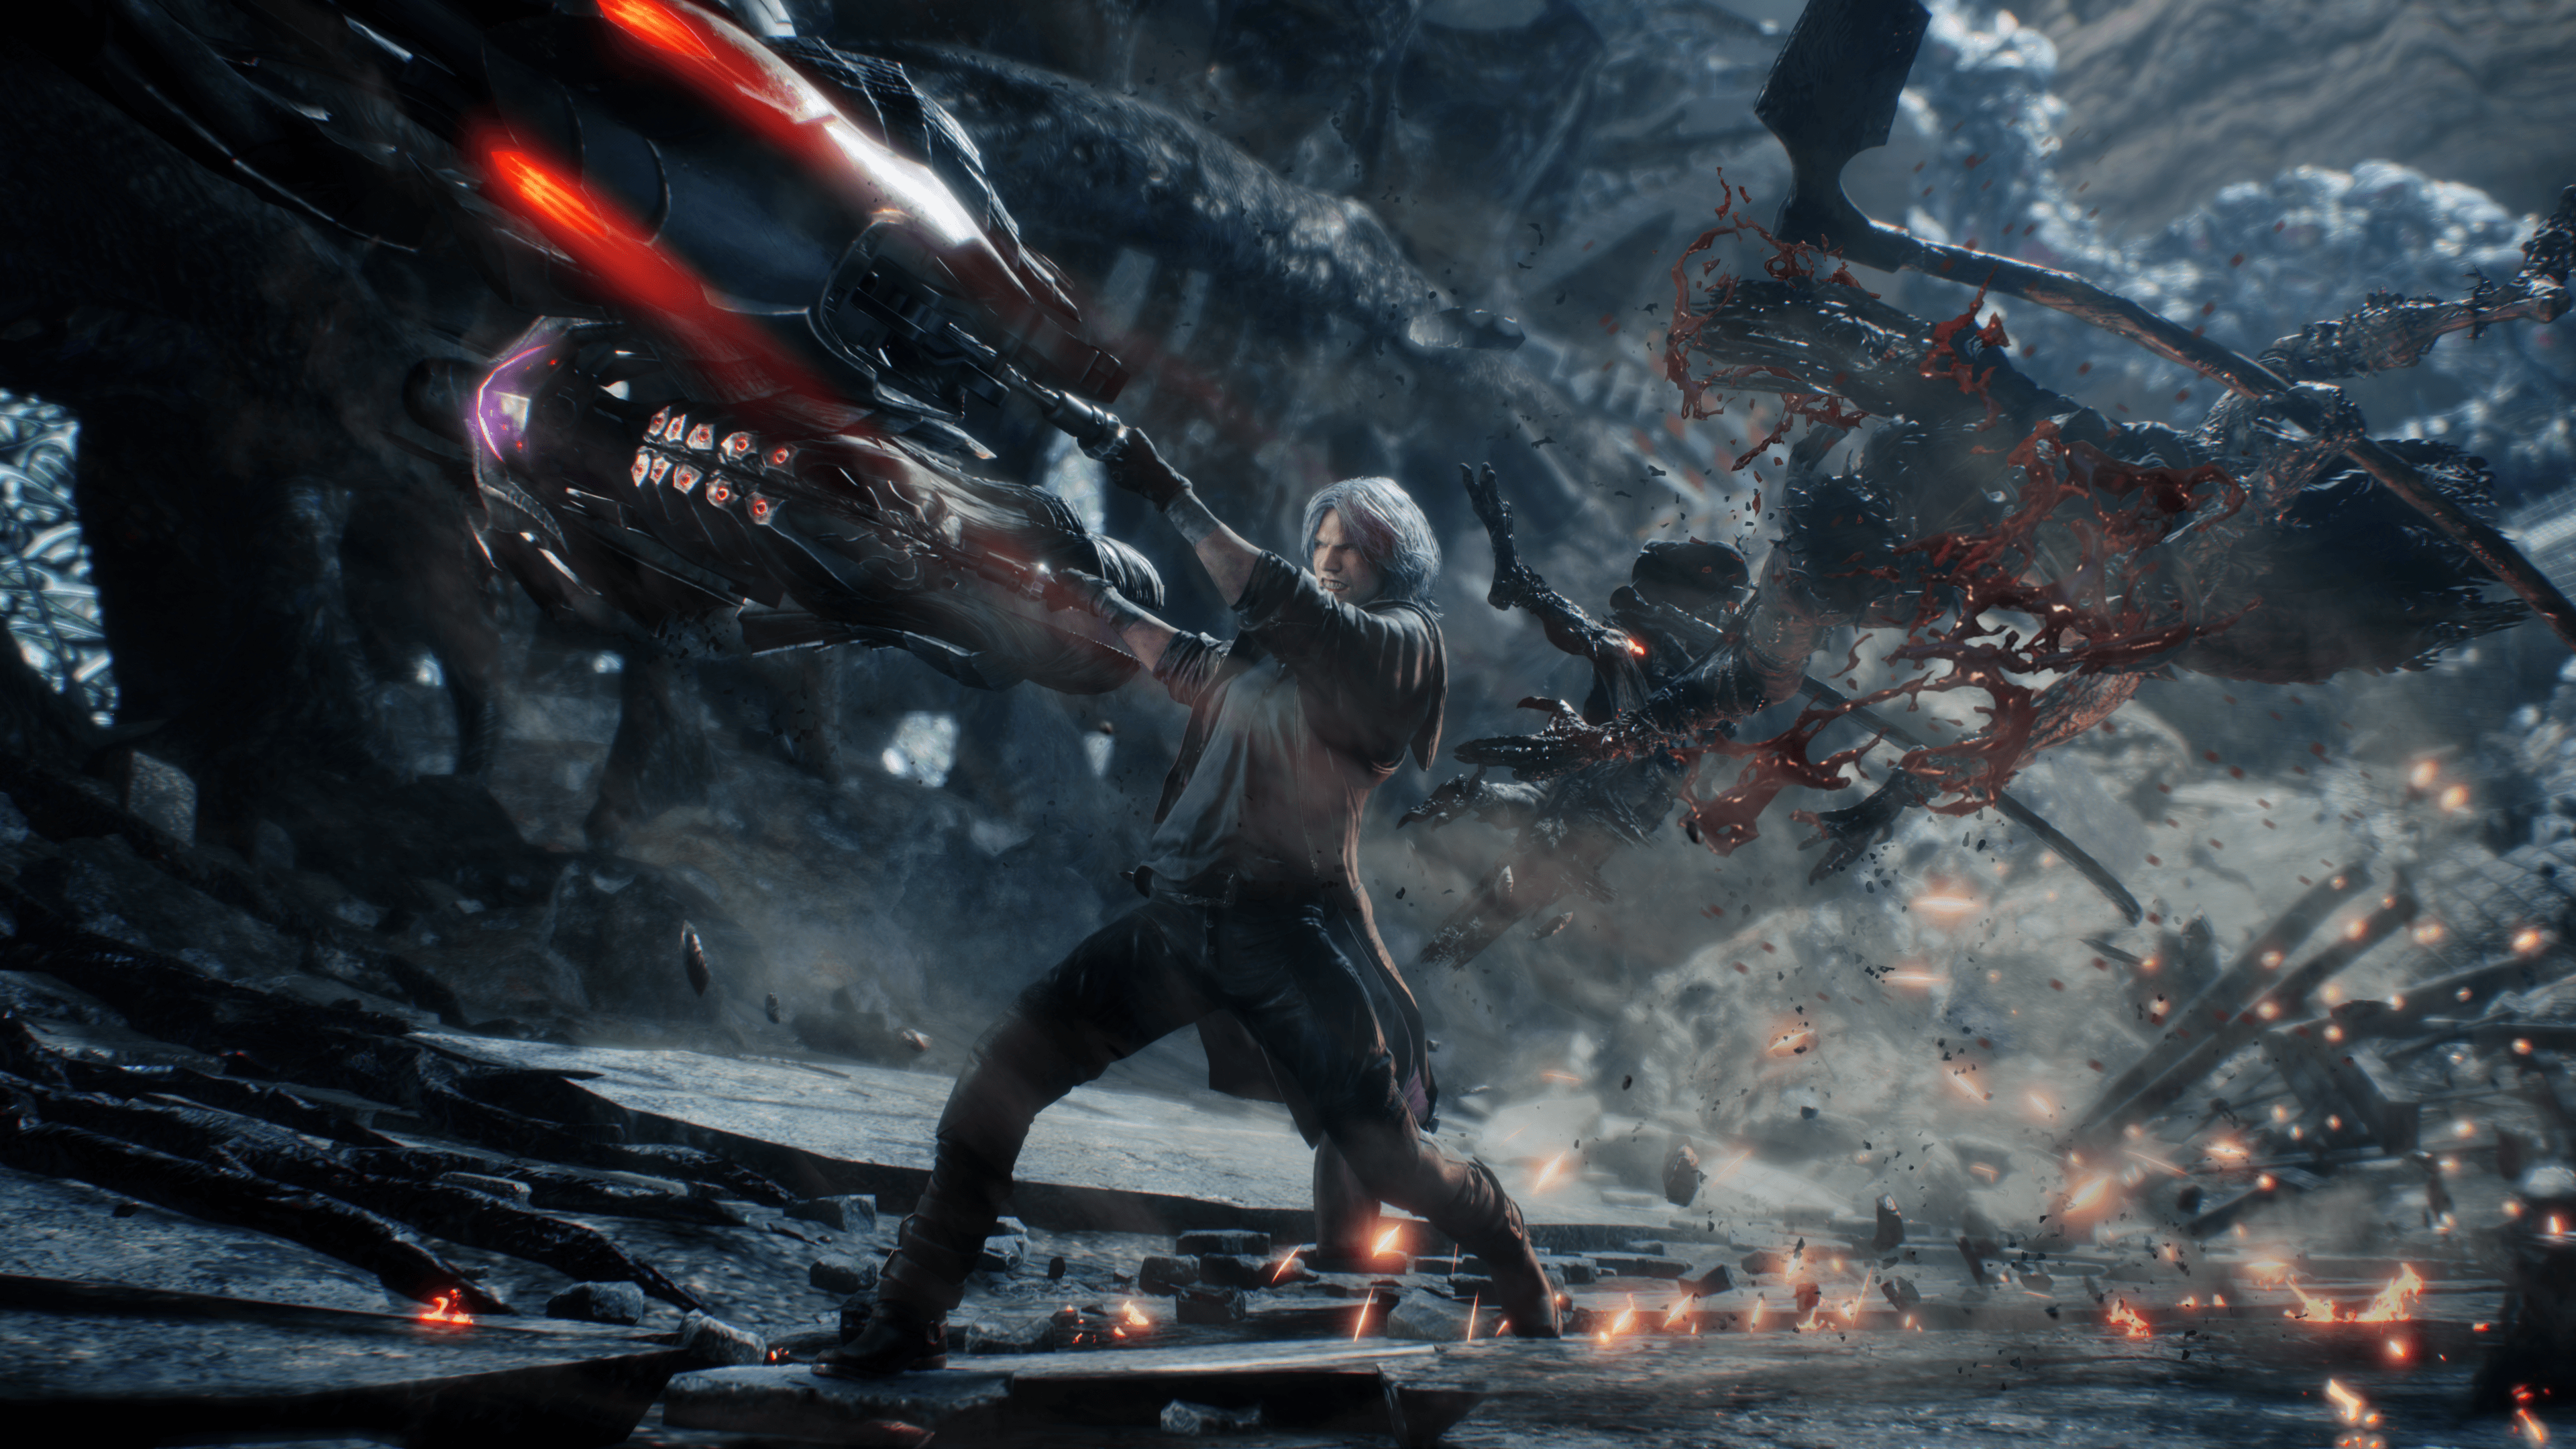 Devil May Cry 5 Wallpaper in 4K and Full HD